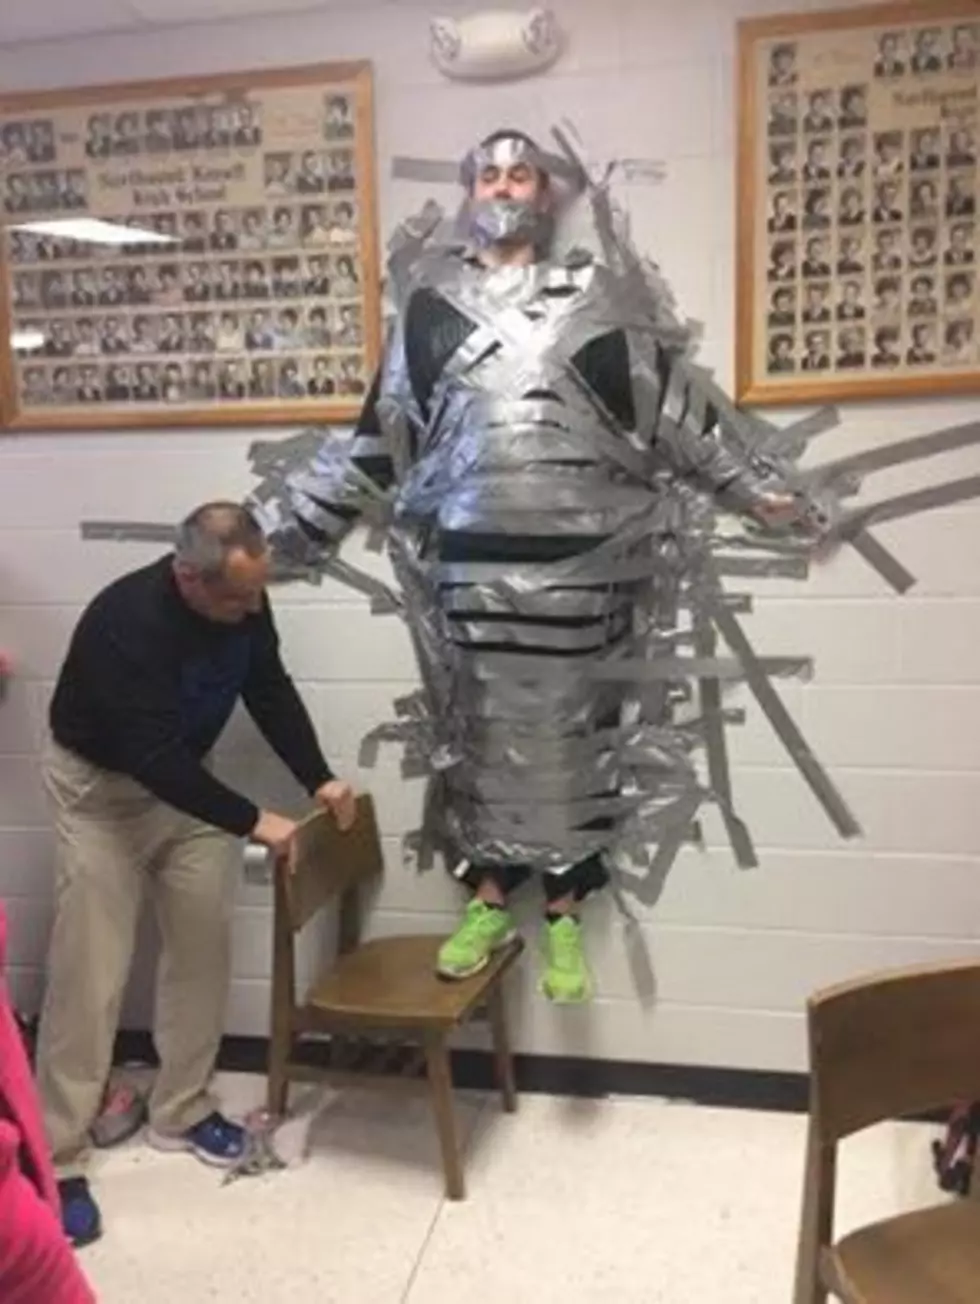 North Iowa Teacher Duct Taped to the Wall